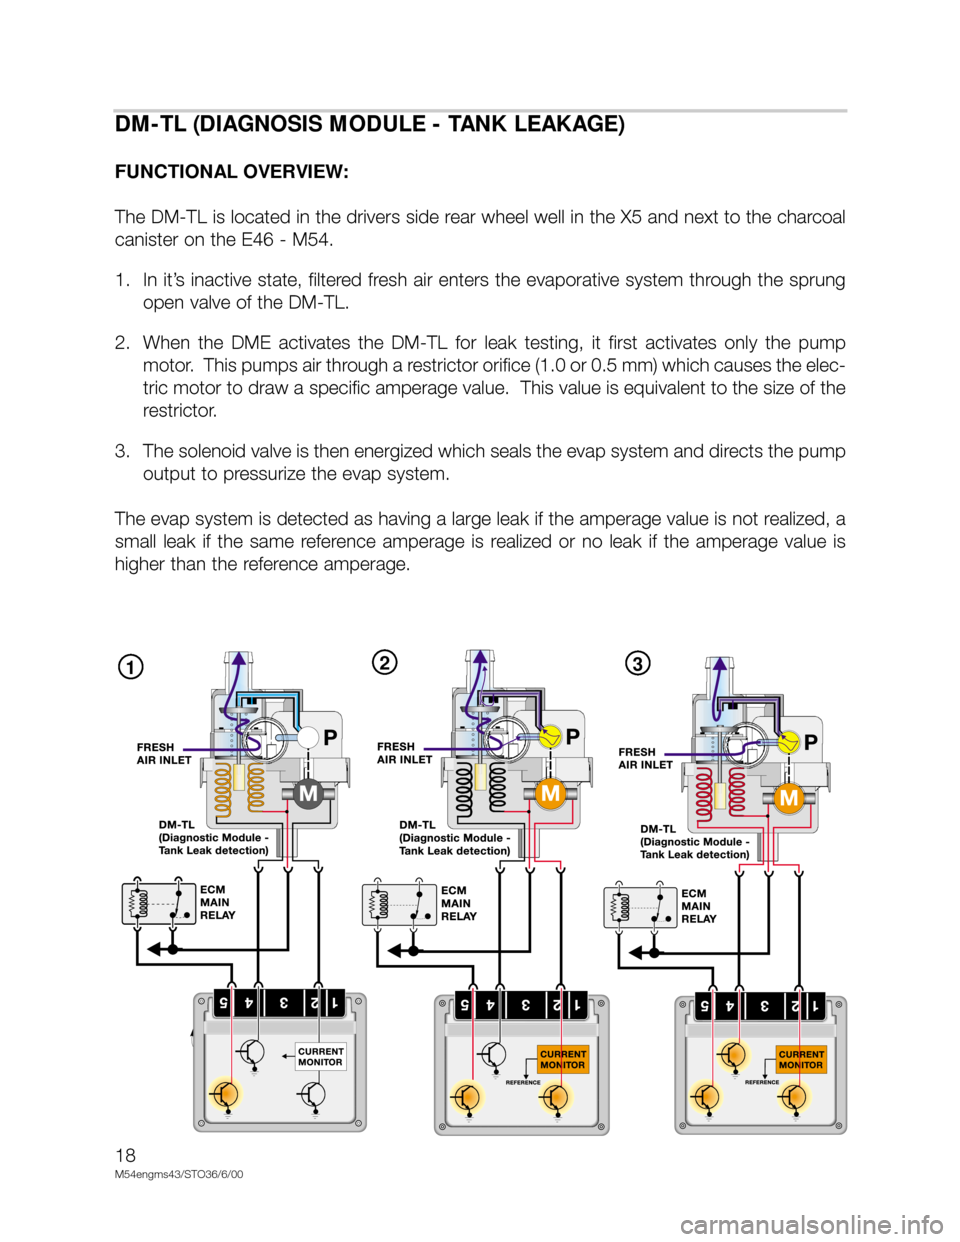 BMW X5 1999 E53 M54 Engine User Guide 18
M54engms43/STO36/6/00
123
DM-TL (DIAGNOSIS MODULE - TANK LEAKAGE)
FUNCTIONAL OVERVIEW:
The DM-TL is located in the drivers side rear wheel well in the X5 and next to the charcoal
canister on the E4